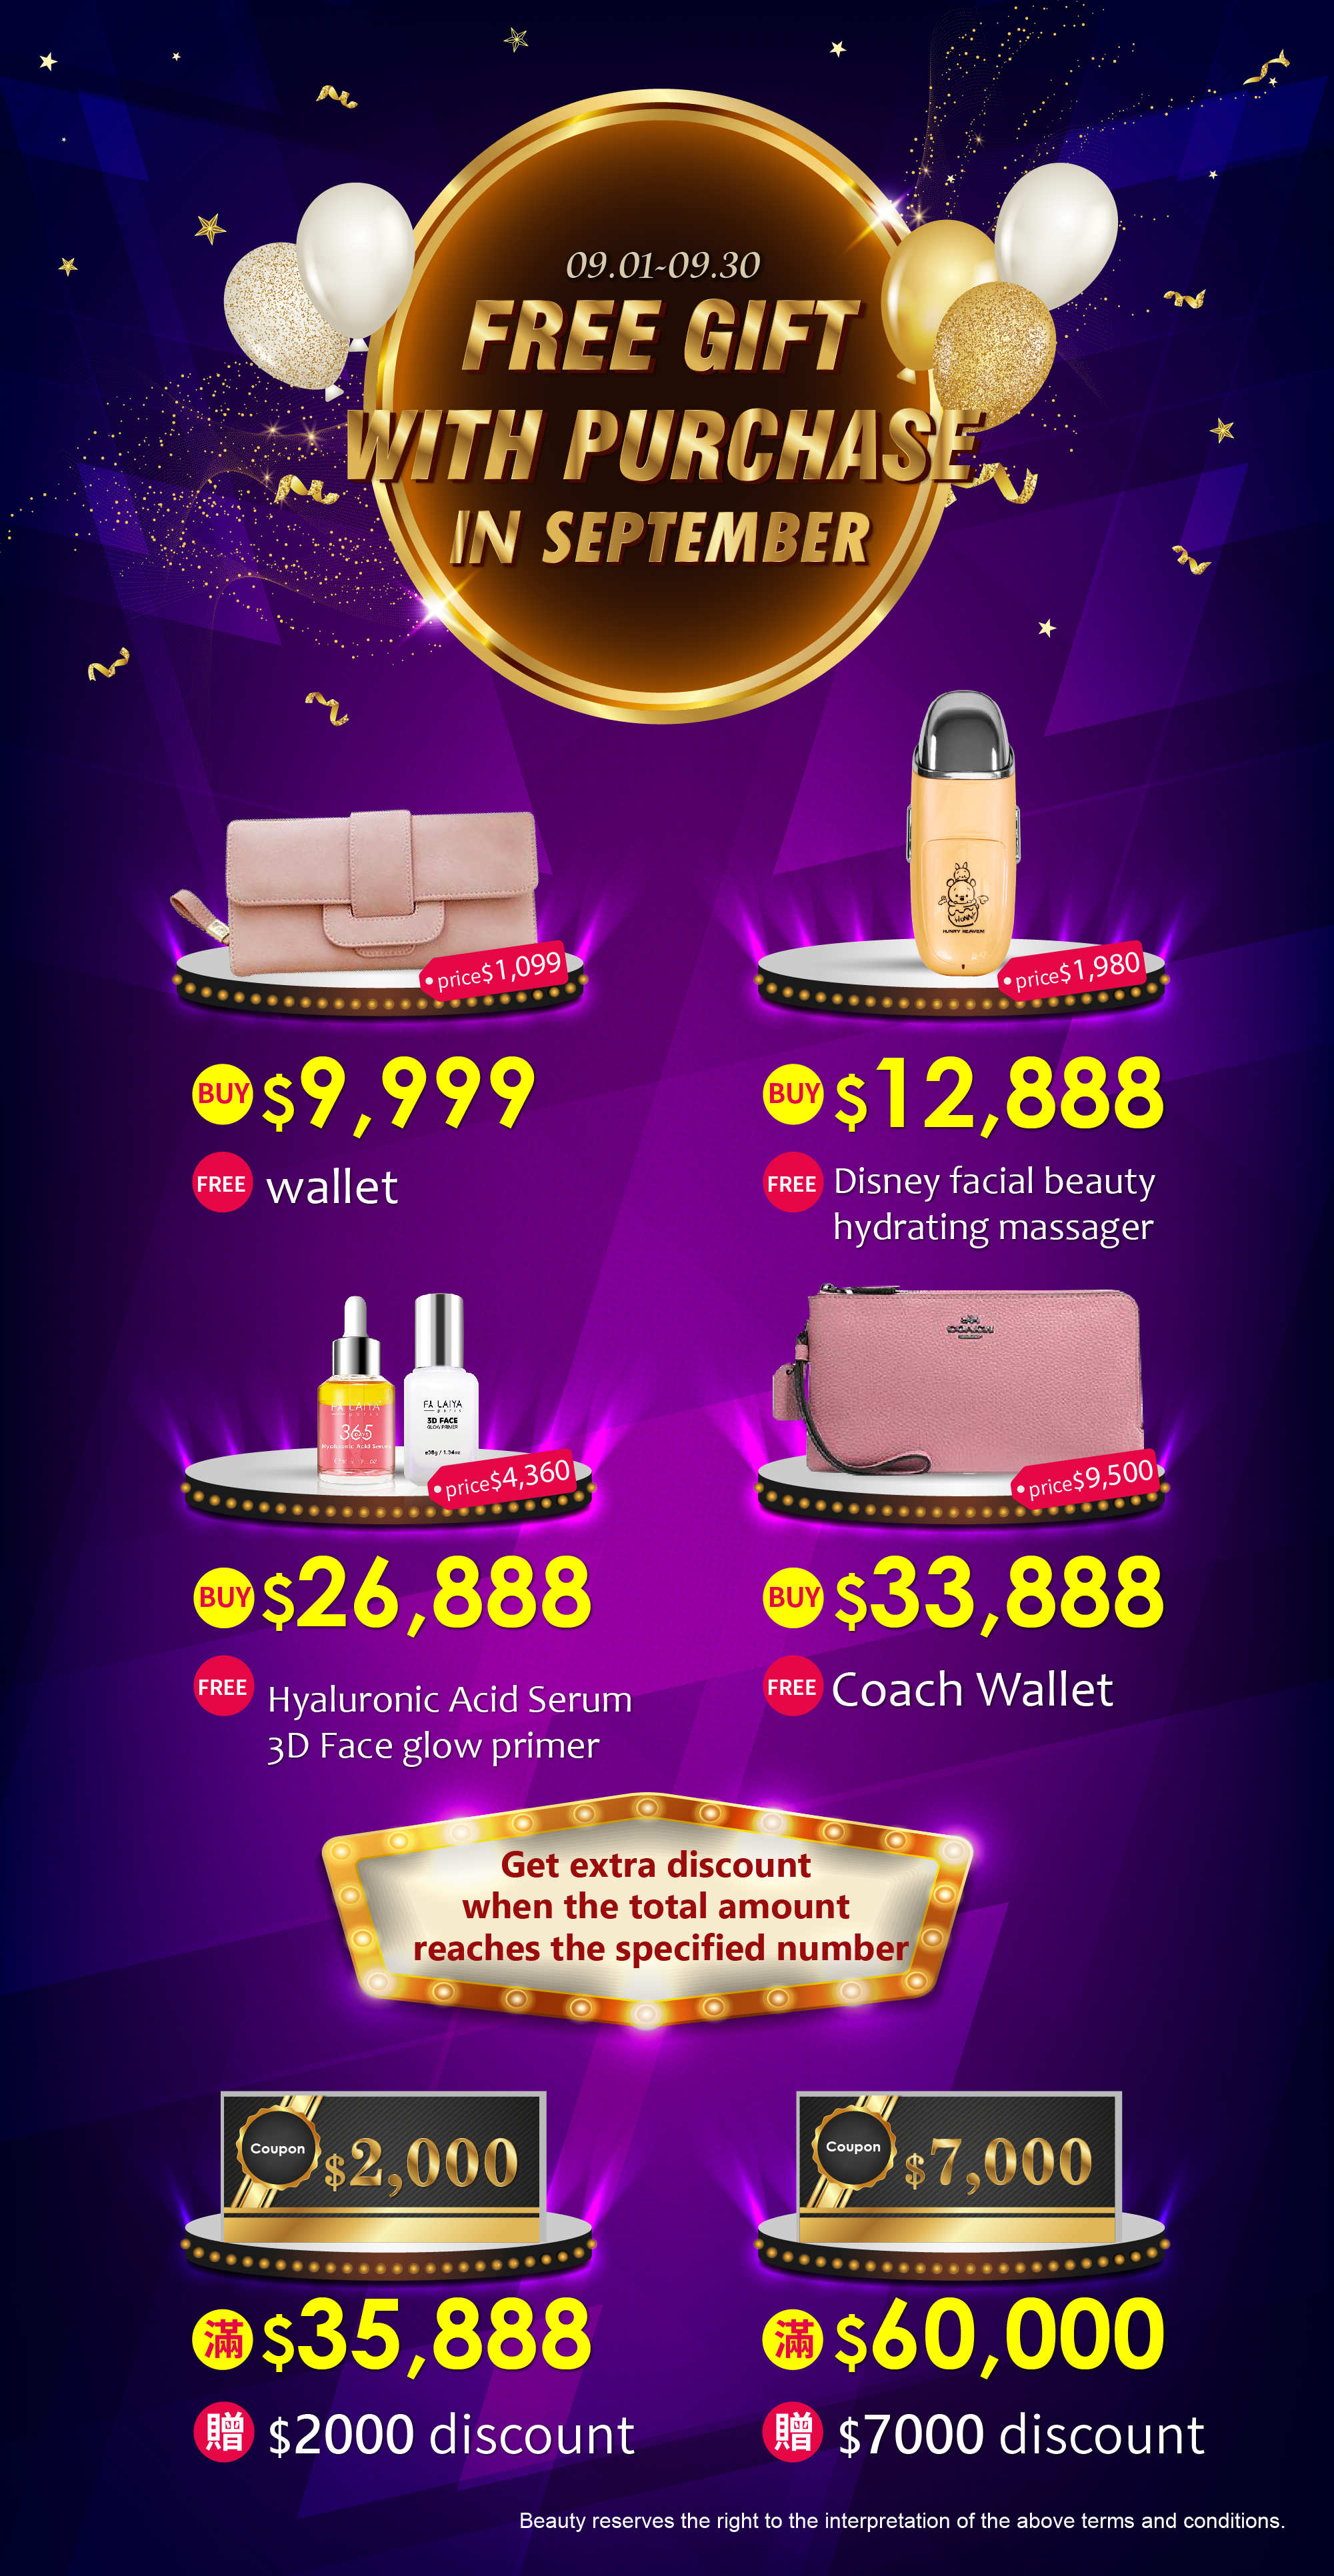 Free Gift With Purchase in September EDM-01.jpg